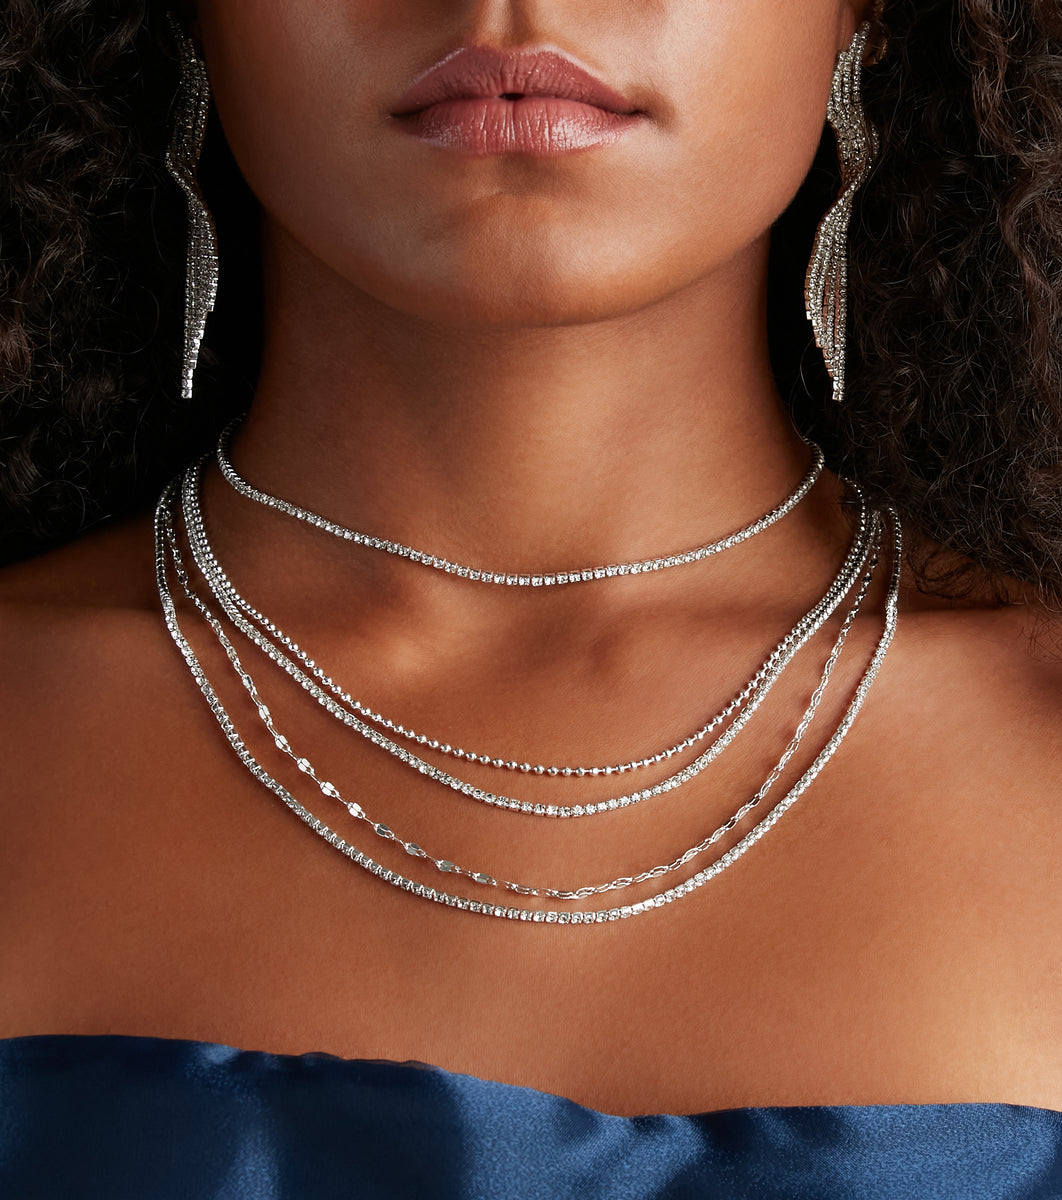 To Layered Be Set Windsor | Rhinestone Necklace Meant